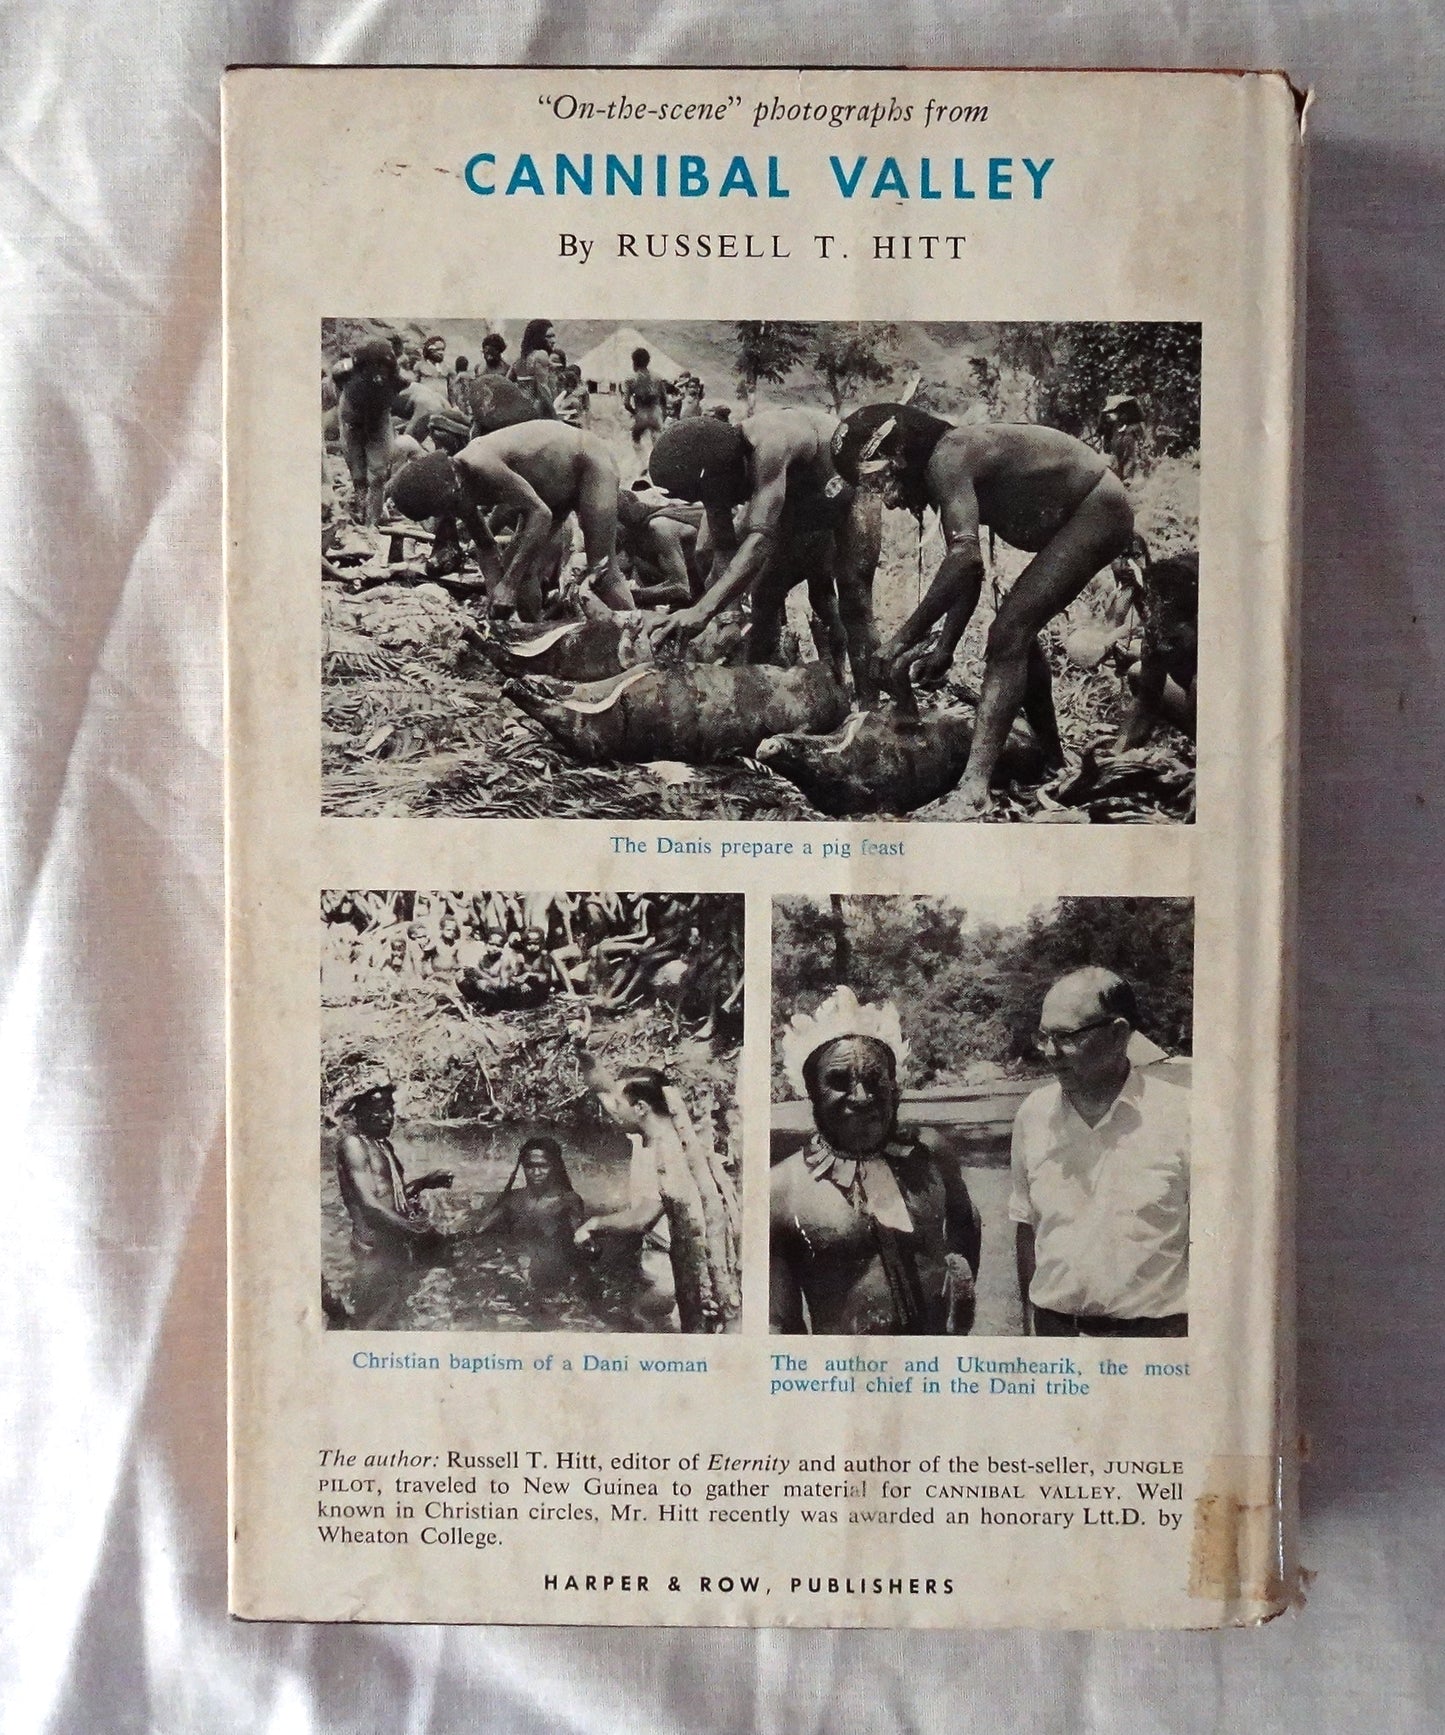 Cannibal Valley by Russell T. Hitt